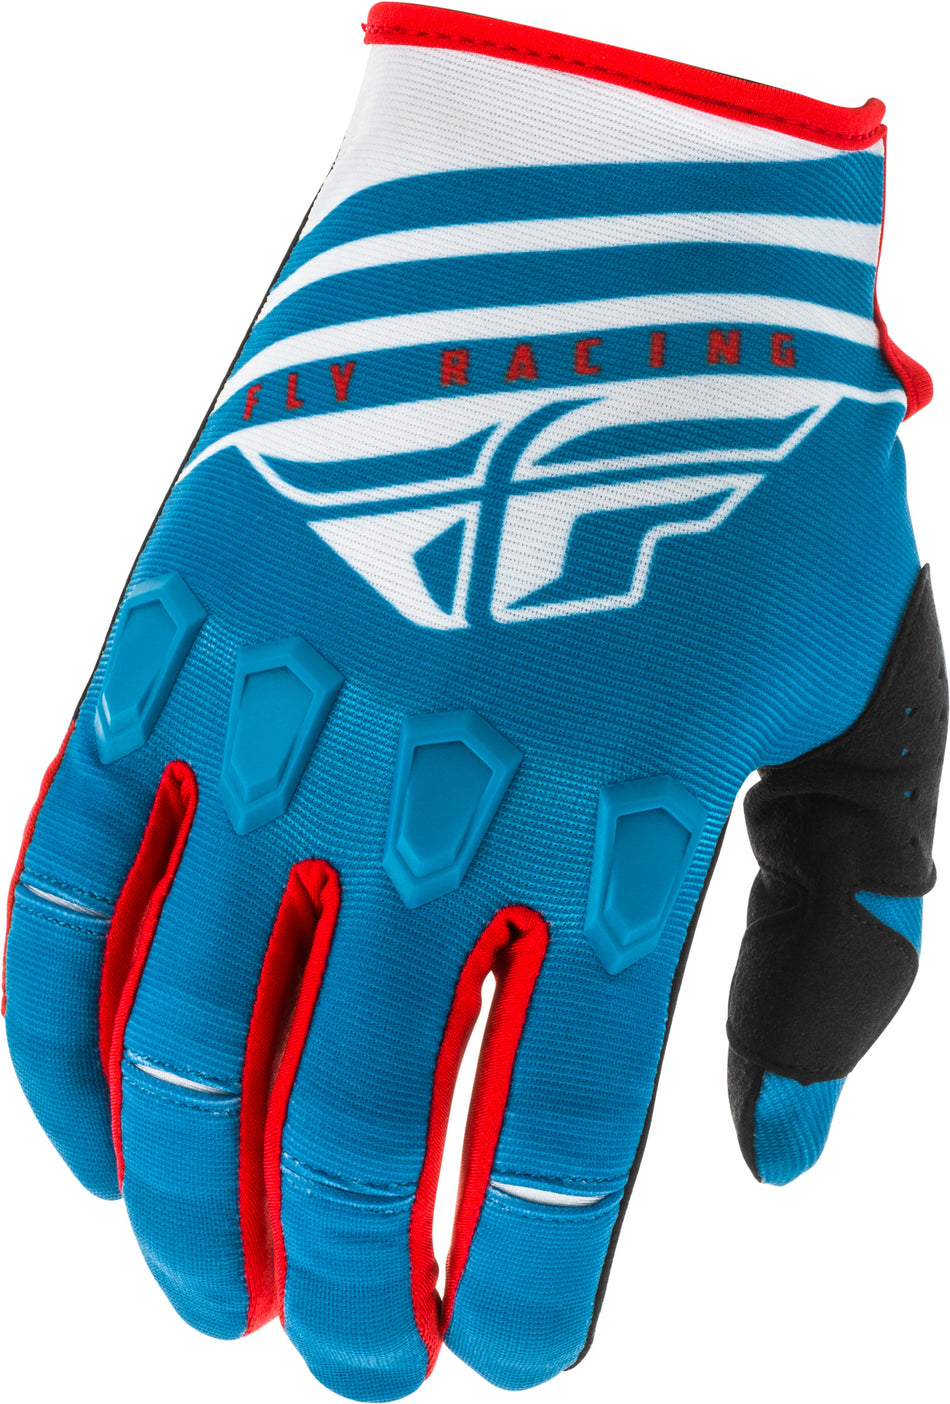 FLY RACING Kinetic K220 Gloves Blue/White/Red Sz 12 373-51112